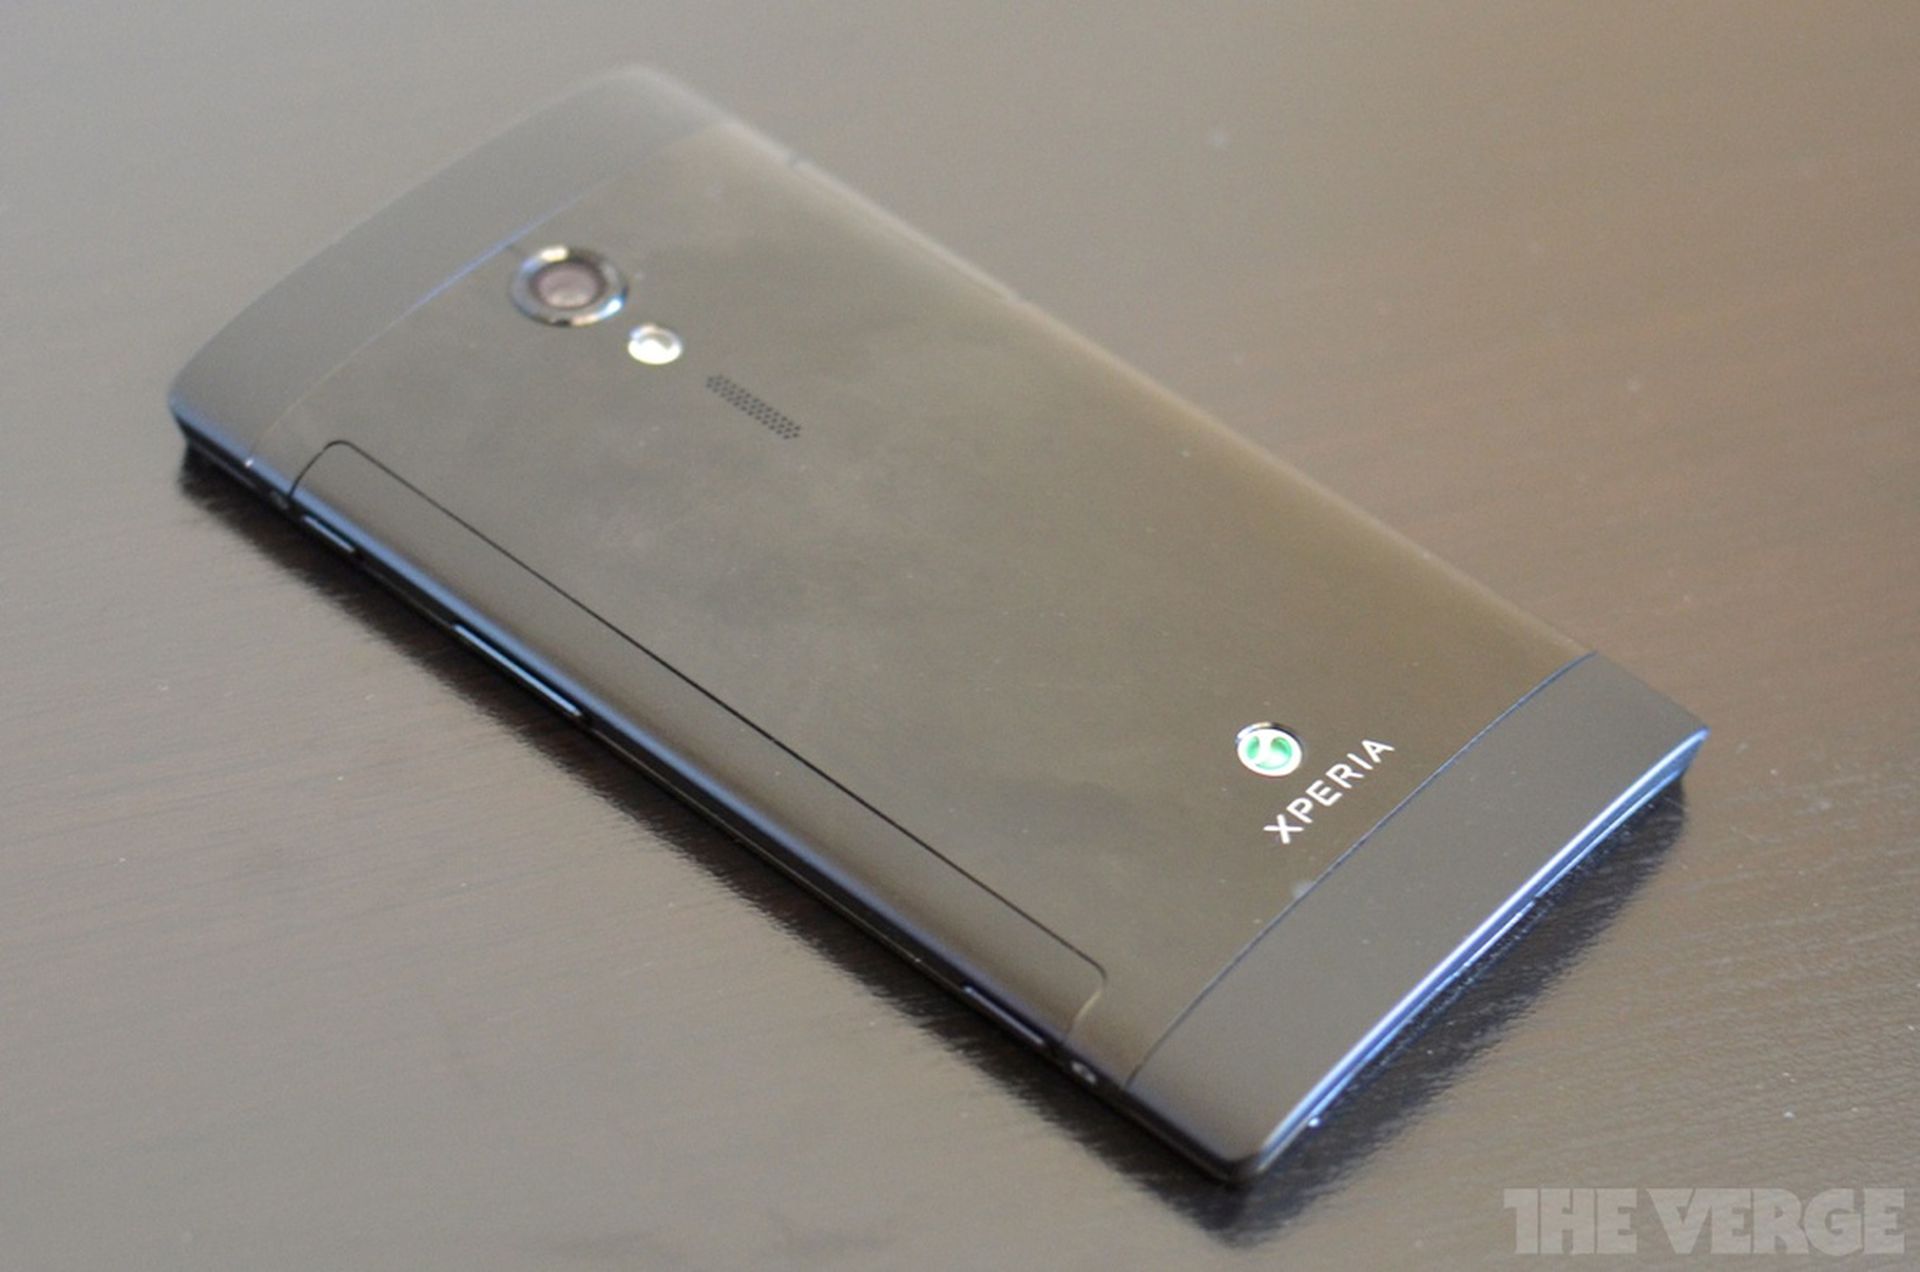 Sony Xperia ion review photos - The Verge